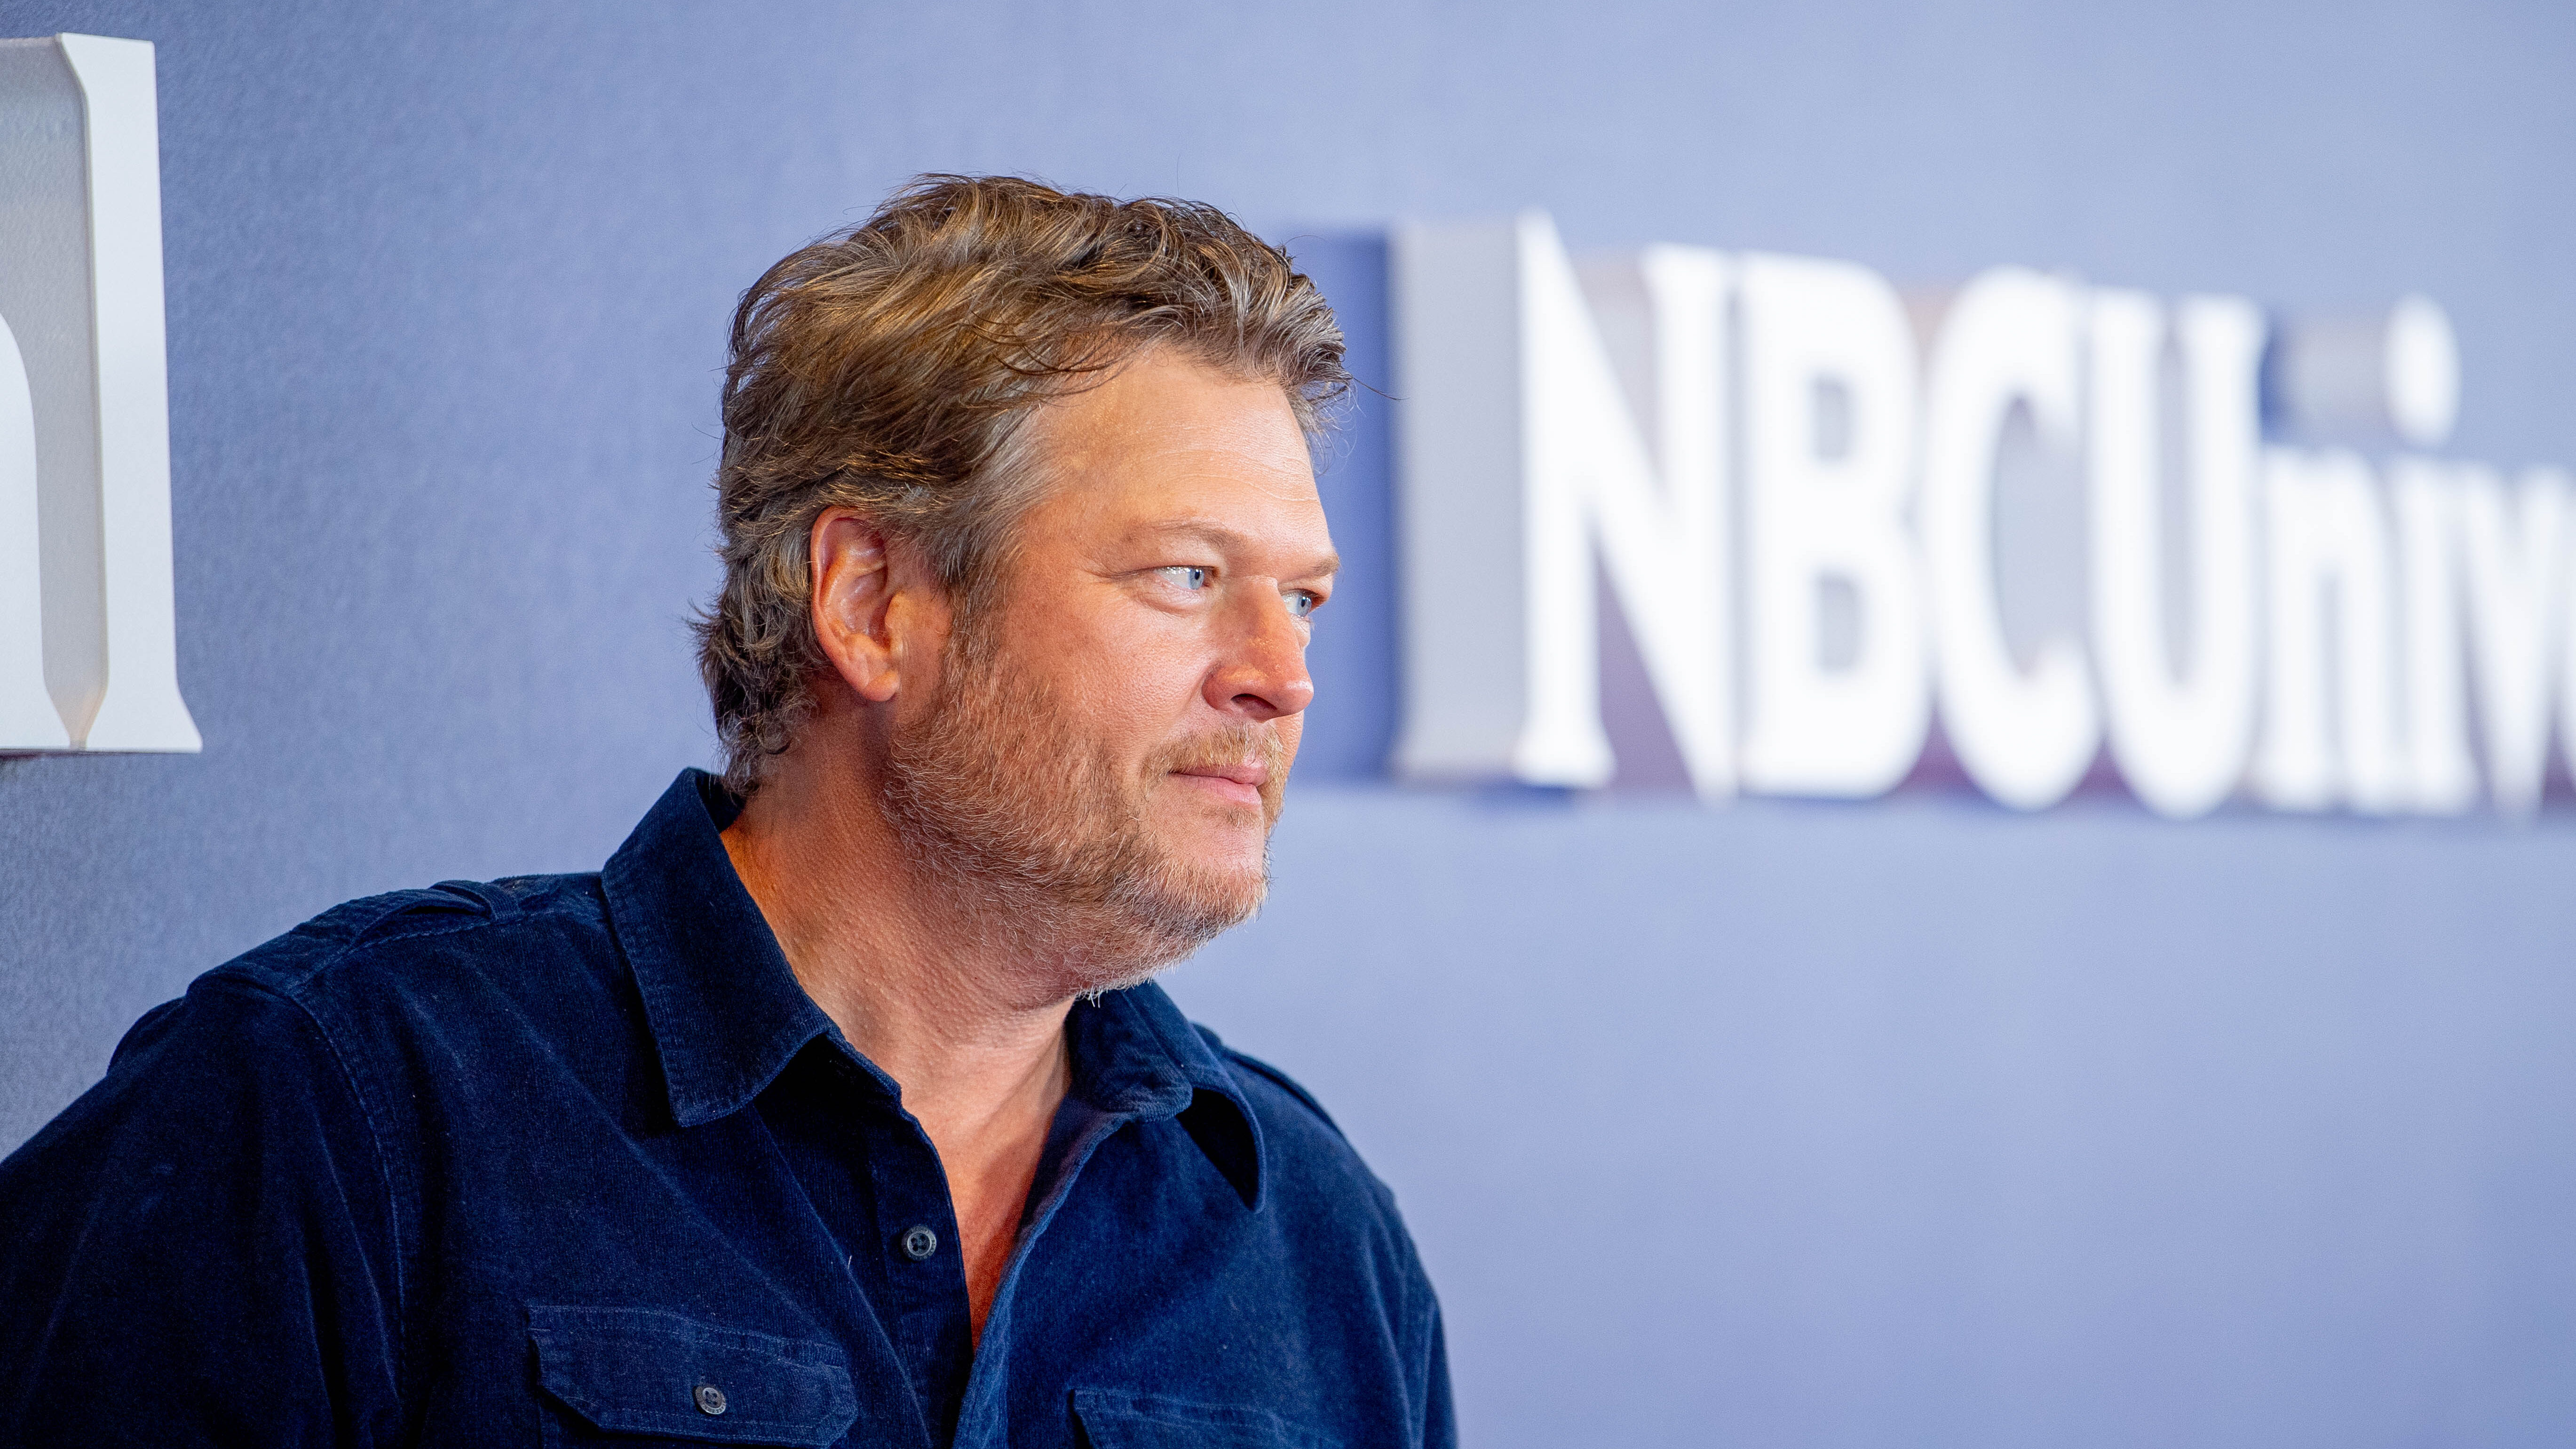 Blake Shelton Announces Exit From ‘The Voice’ as New Coaches Join